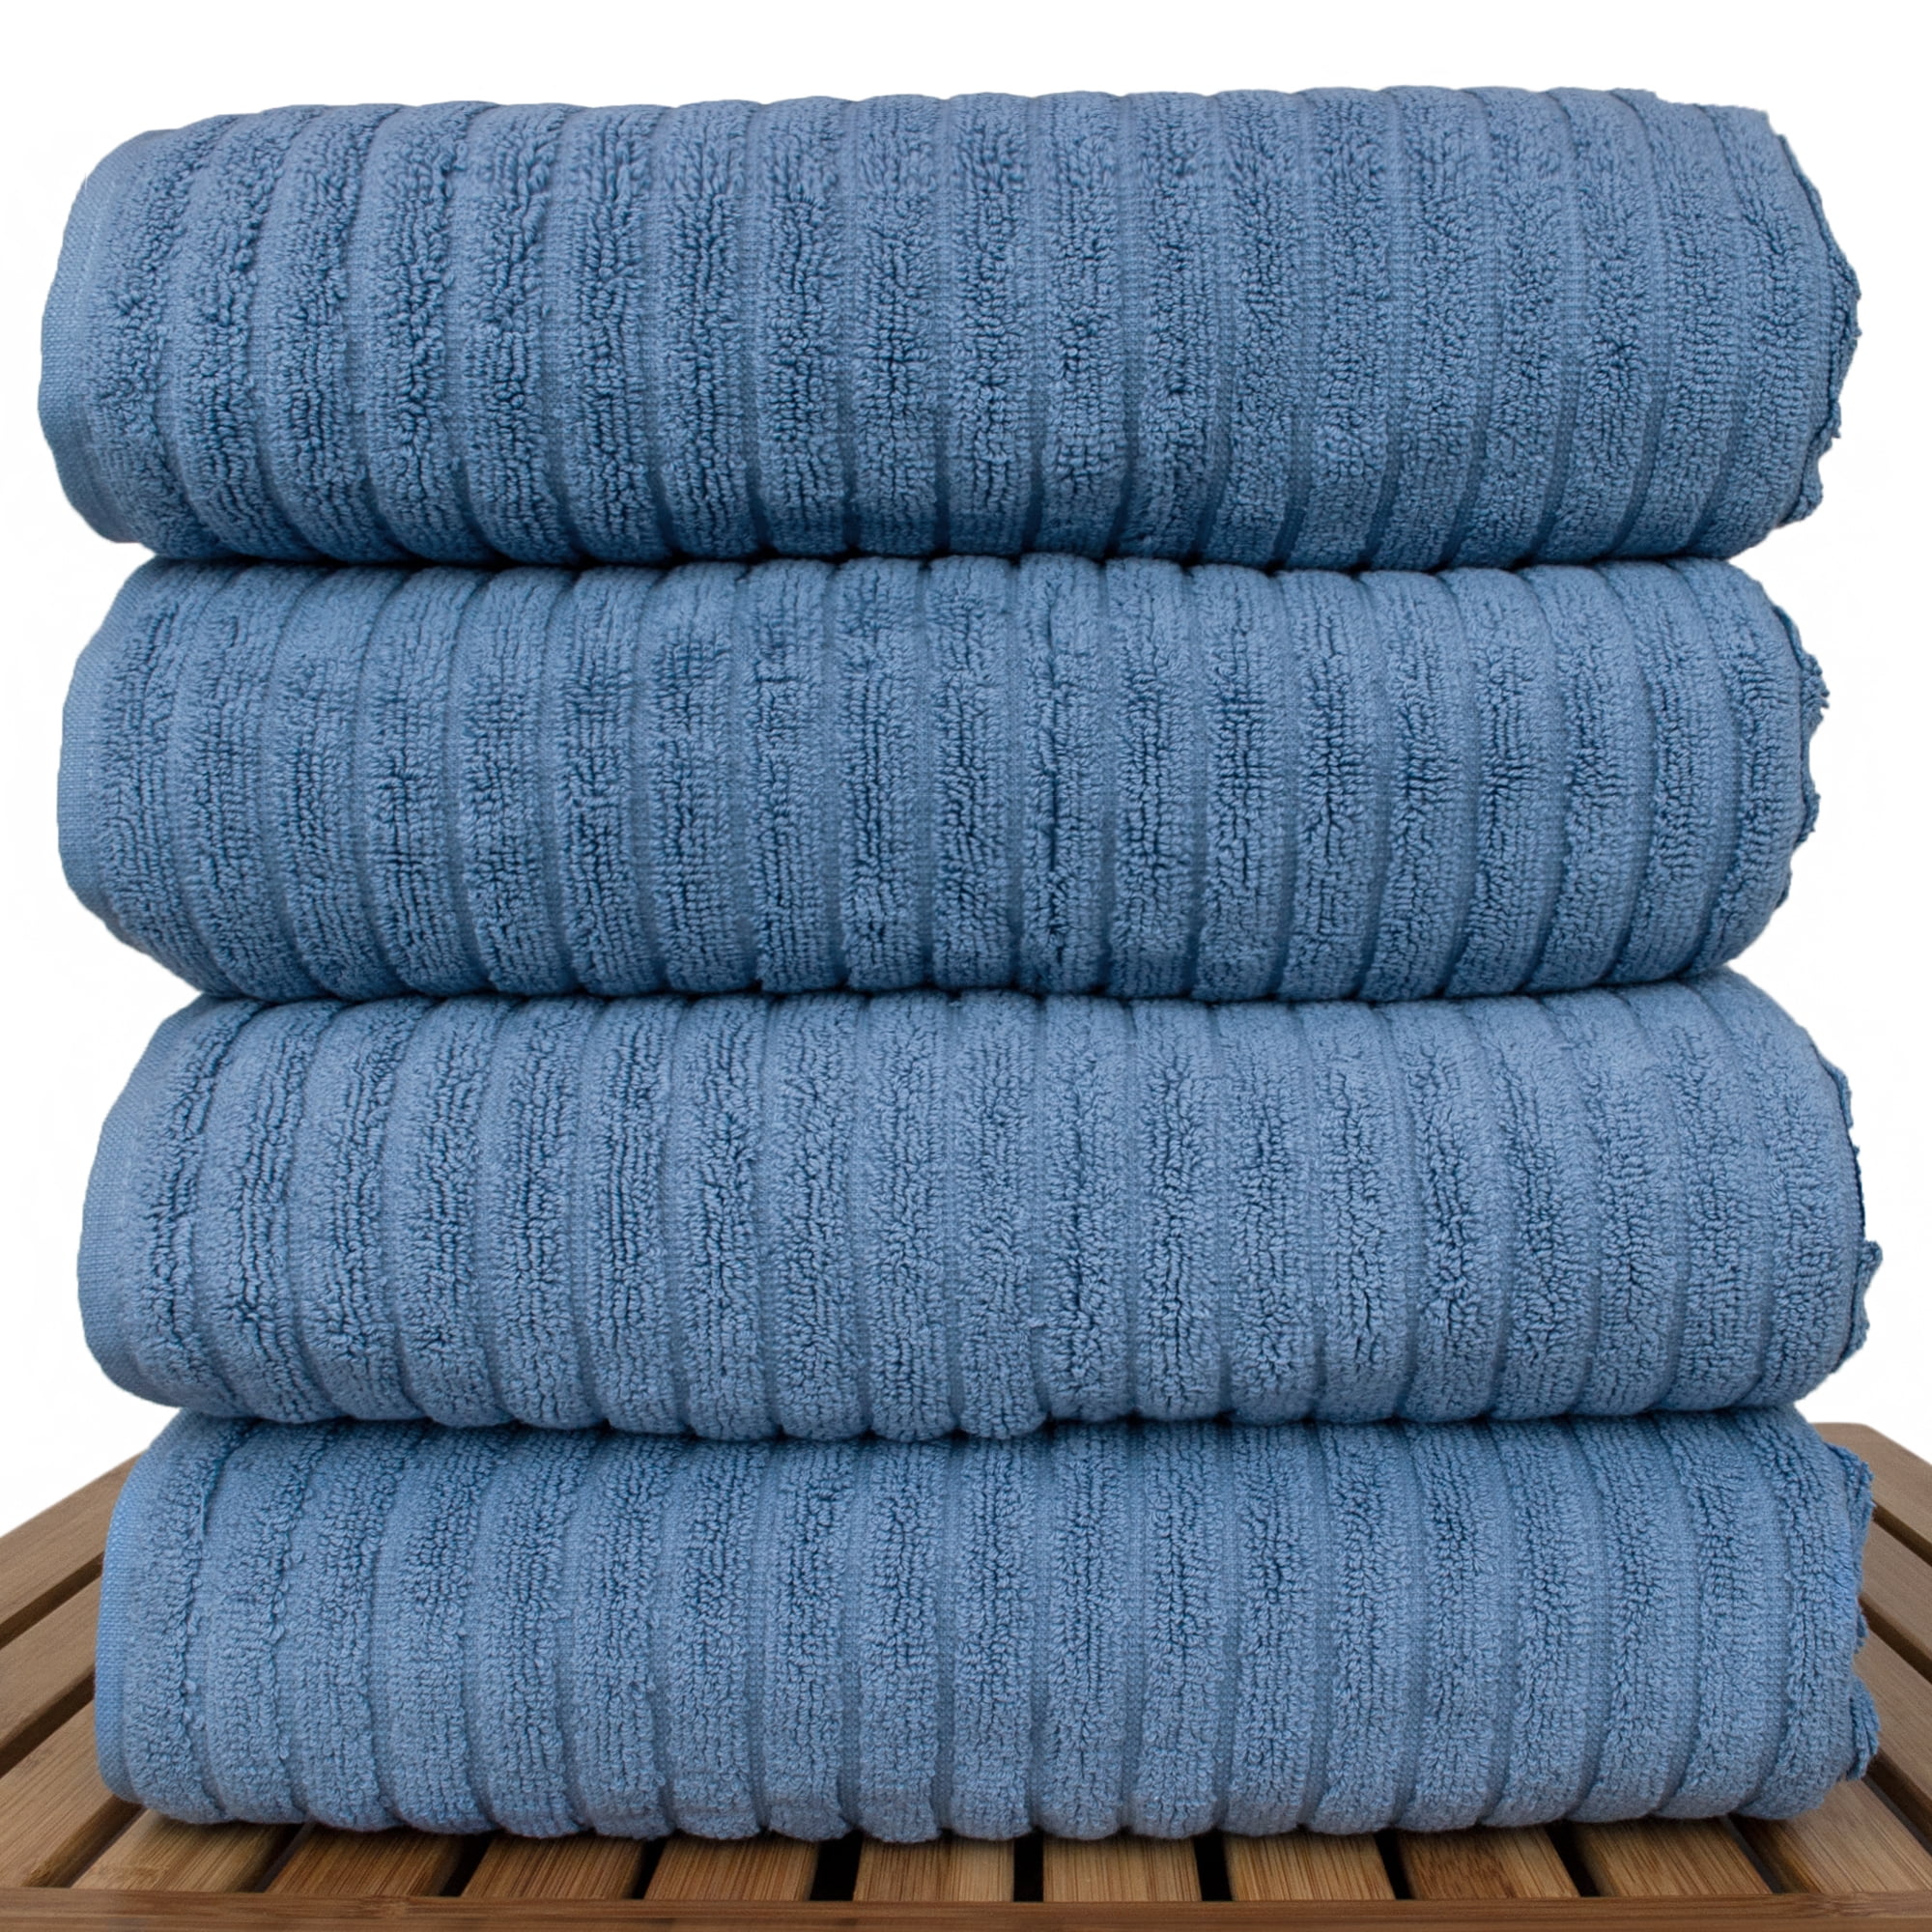 Luxury Hotel and Spa Towel 100-percent Genuine Turkish Cotton Bath Towels  Striped (Set of 4) - Bed Bath & Beyond - 10102608